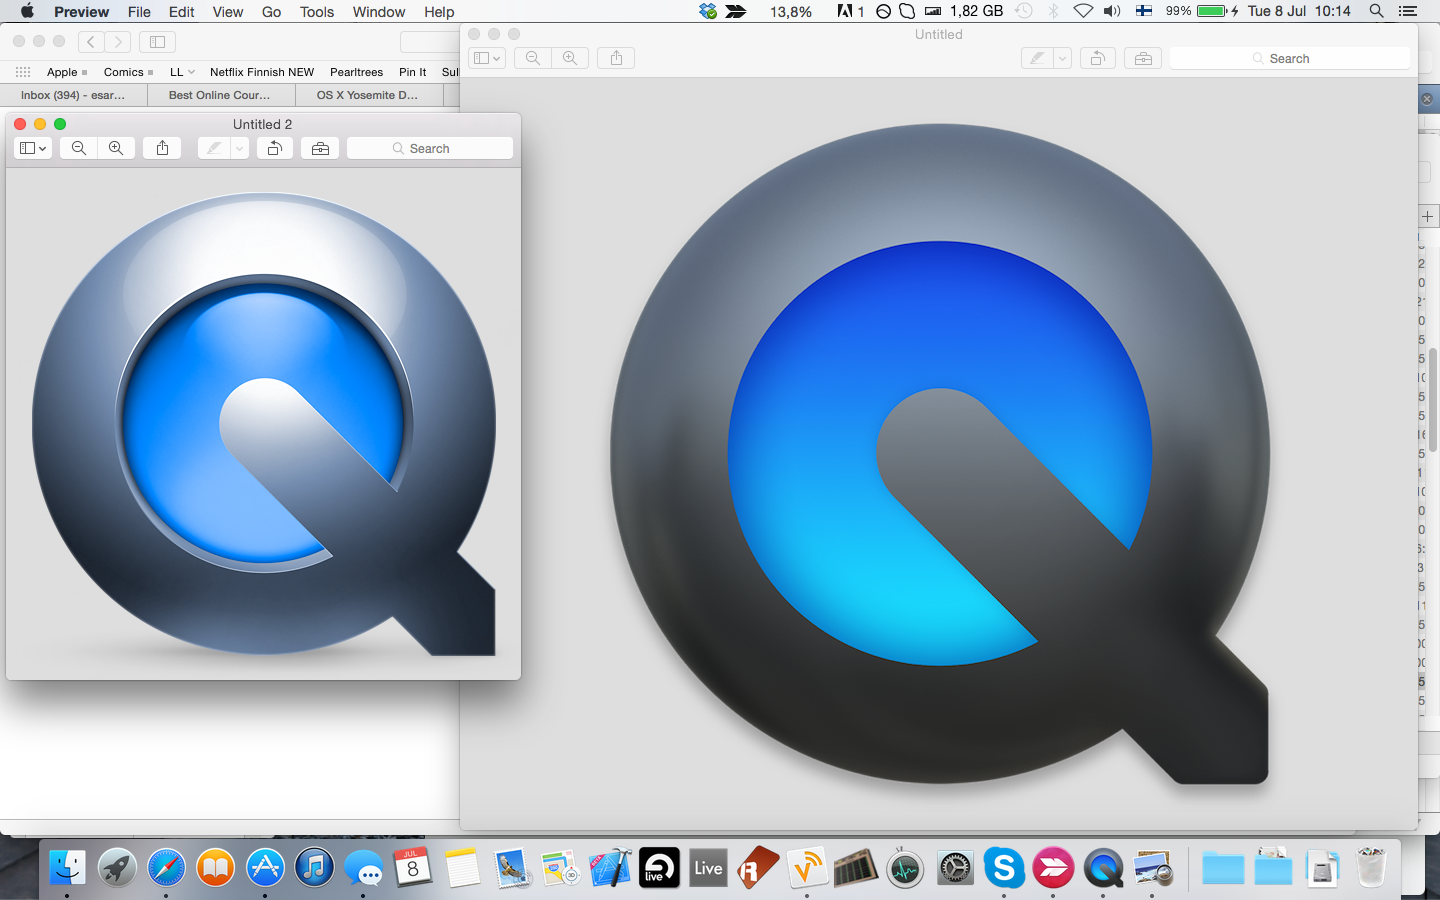 quicktime player for os x